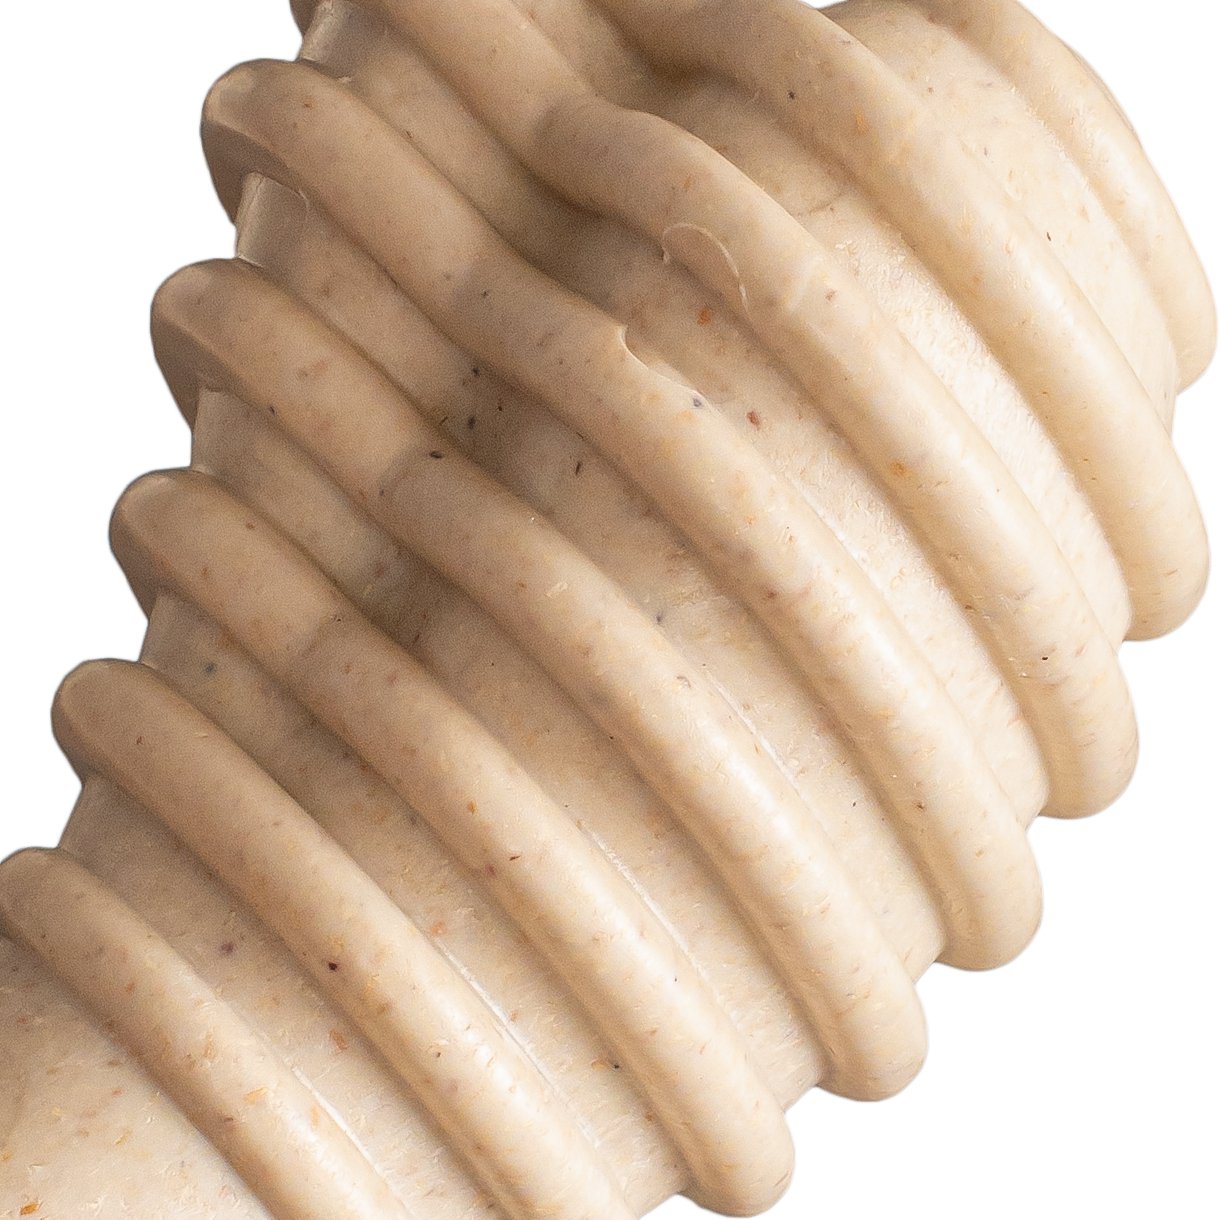 BetterBone - CLASSIC All Natural, Eco, Safe on teeth Chew Toy - Happy Hounds Pet Supply